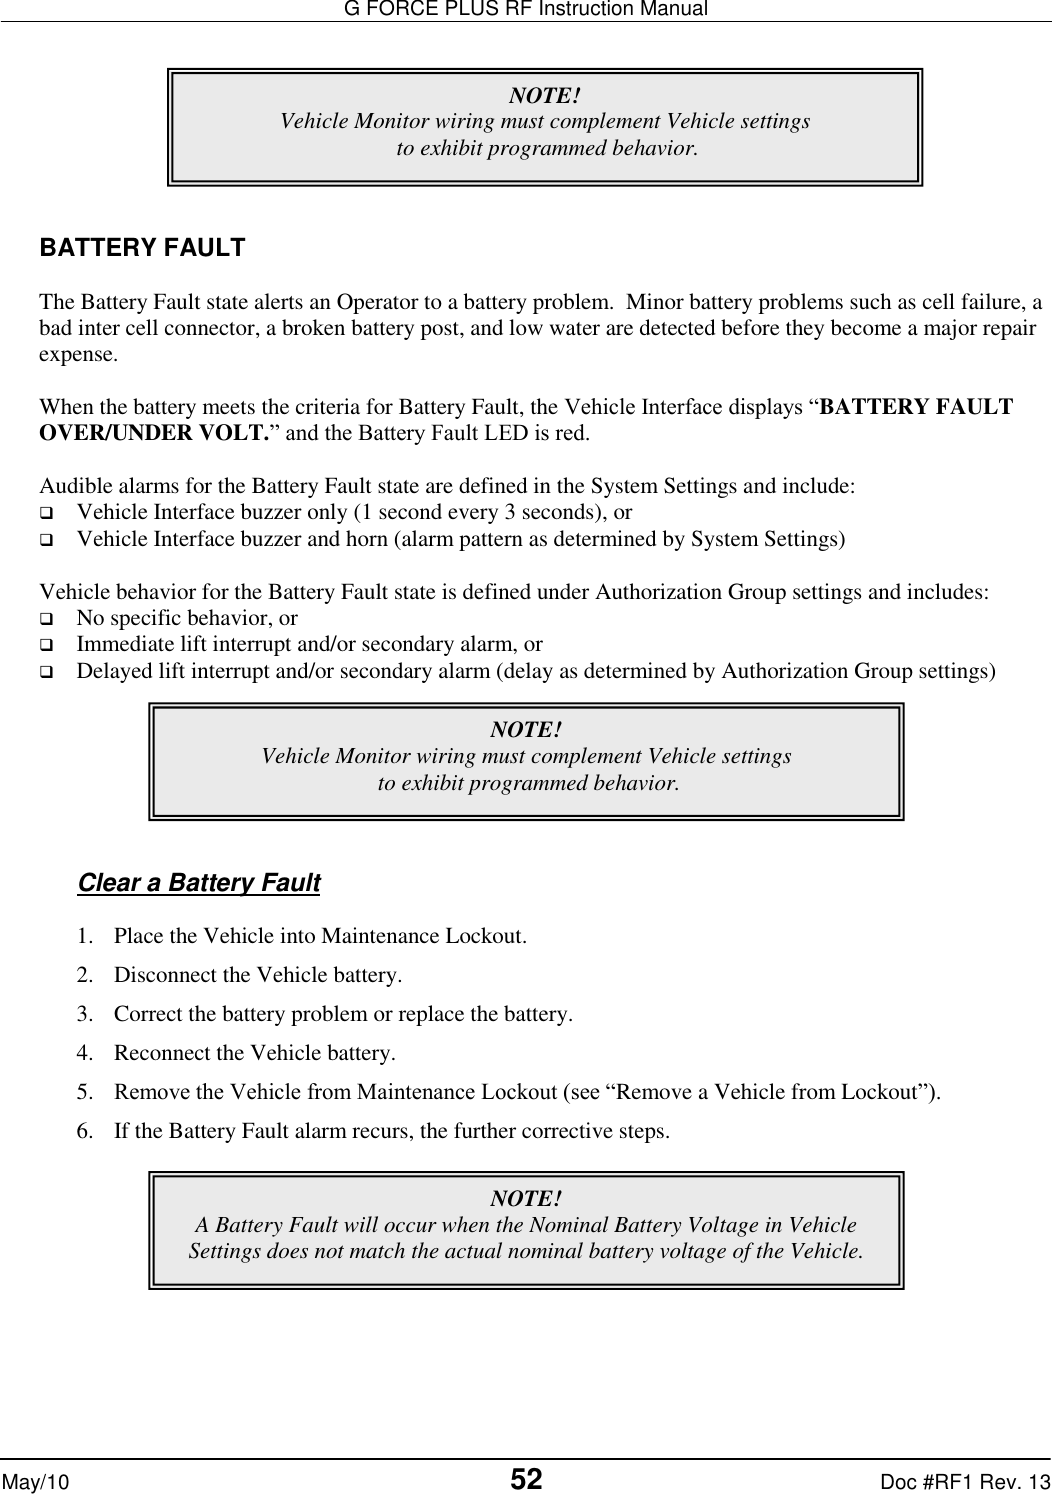 G FORCE PLUS RF Instruction Manual   May/10 52 Doc #RF1 Rev. 13        BATTERY FAULT  The Battery Fault state alerts an Operator to a battery problem.  Minor battery problems such as cell failure, a bad inter cell connector, a broken battery post, and low water are detected before they become a major repair expense.  When the battery meets the criteria for Battery Fault, the Vehicle Interface displays “BATTERY FAULT OVER/UNDER VOLT.” and the Battery Fault LED is red.  Audible alarms for the Battery Fault state are defined in the System Settings and include:  Vehicle Interface buzzer only (1 second every 3 seconds), or  Vehicle Interface buzzer and horn (alarm pattern as determined by System Settings)  Vehicle behavior for the Battery Fault state is defined under Authorization Group settings and includes:  No specific behavior, or  Immediate lift interrupt and/or secondary alarm, or  Delayed lift interrupt and/or secondary alarm (delay as determined by Authorization Group settings)        Clear a Battery Fault  1. Place the Vehicle into Maintenance Lockout. 2. Disconnect the Vehicle battery. 3. Correct the battery problem or replace the battery.   4. Reconnect the Vehicle battery. 5. Remove the Vehicle from Maintenance Lockout (see “Remove a Vehicle from Lockout”). 6. If the Battery Fault alarm recurs, the further corrective steps.     NOTE! Vehicle Monitor wiring must complement Vehicle settings  to exhibit programmed behavior. NOTE! Vehicle Monitor wiring must complement Vehicle settings  to exhibit programmed behavior. NOTE! A Battery Fault will occur when the Nominal Battery Voltage in Vehicle Settings does not match the actual nominal battery voltage of the Vehicle.   